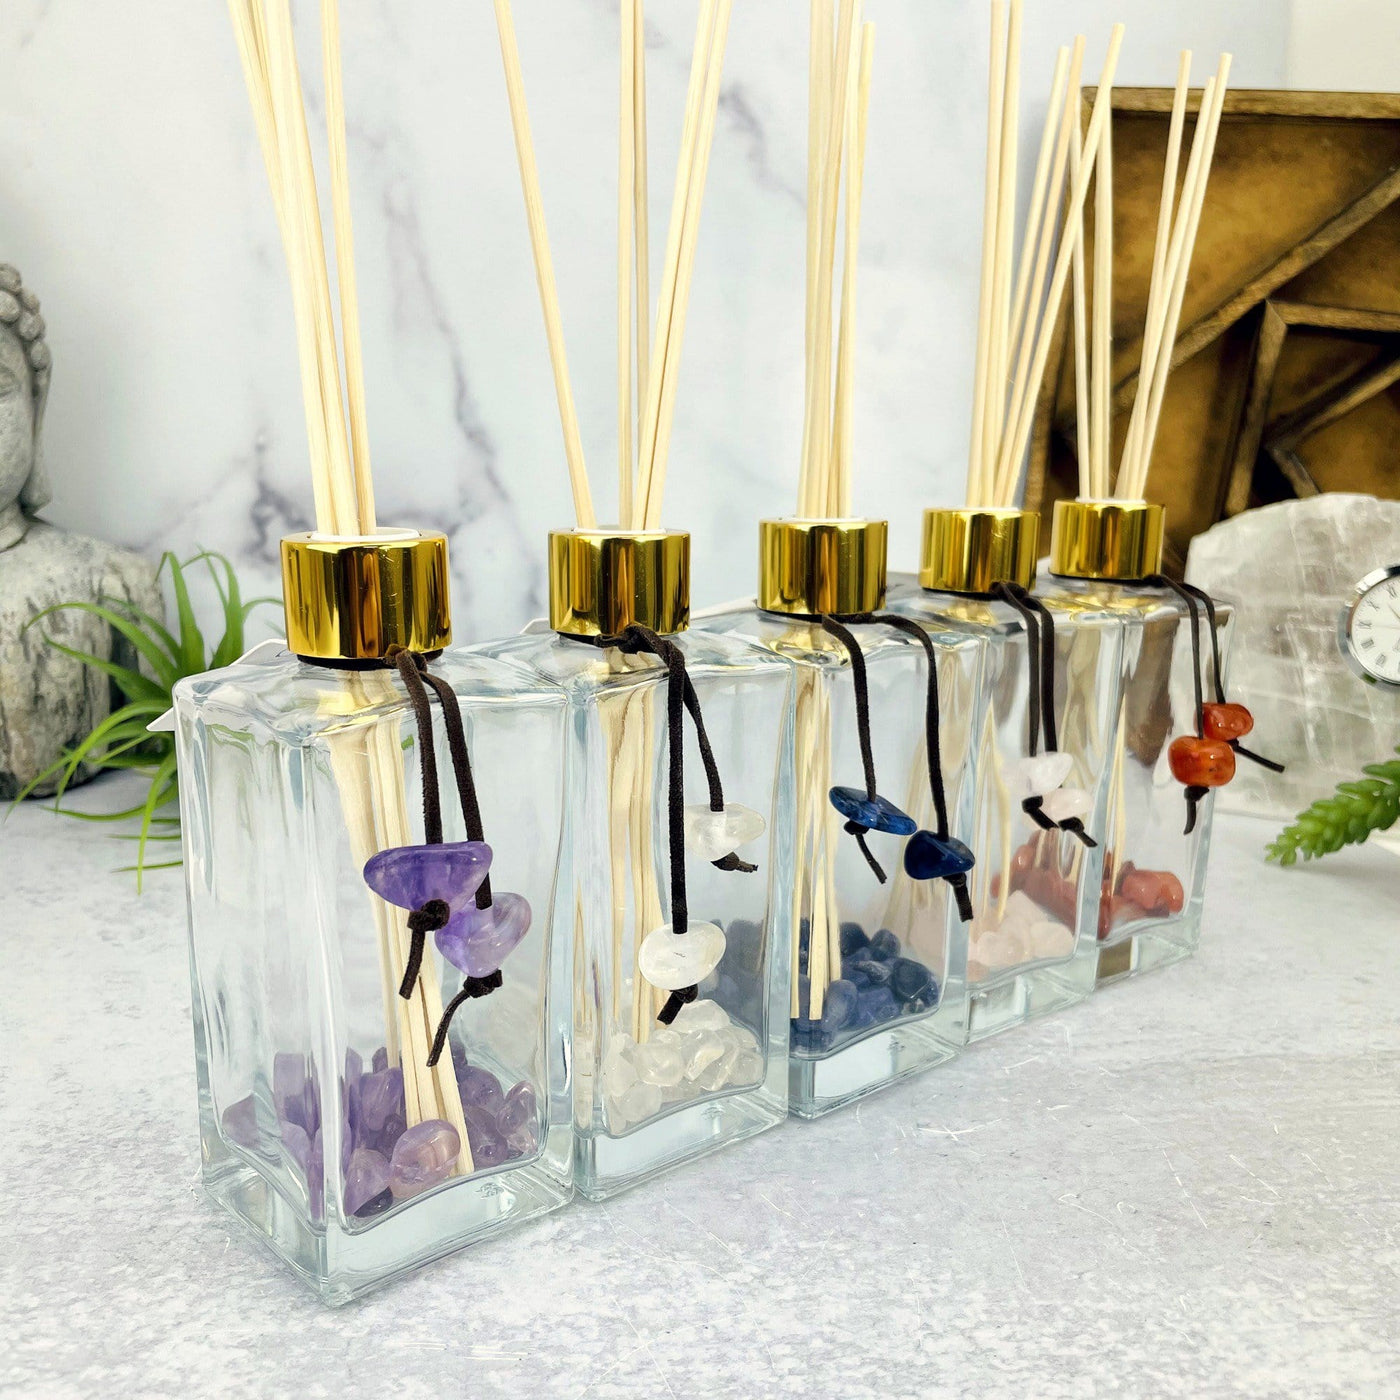 Tumbled Stone Diffuser Bottle--side shot view of stones inside glass bottle with wooden sticks and string with stones hanging on the side.